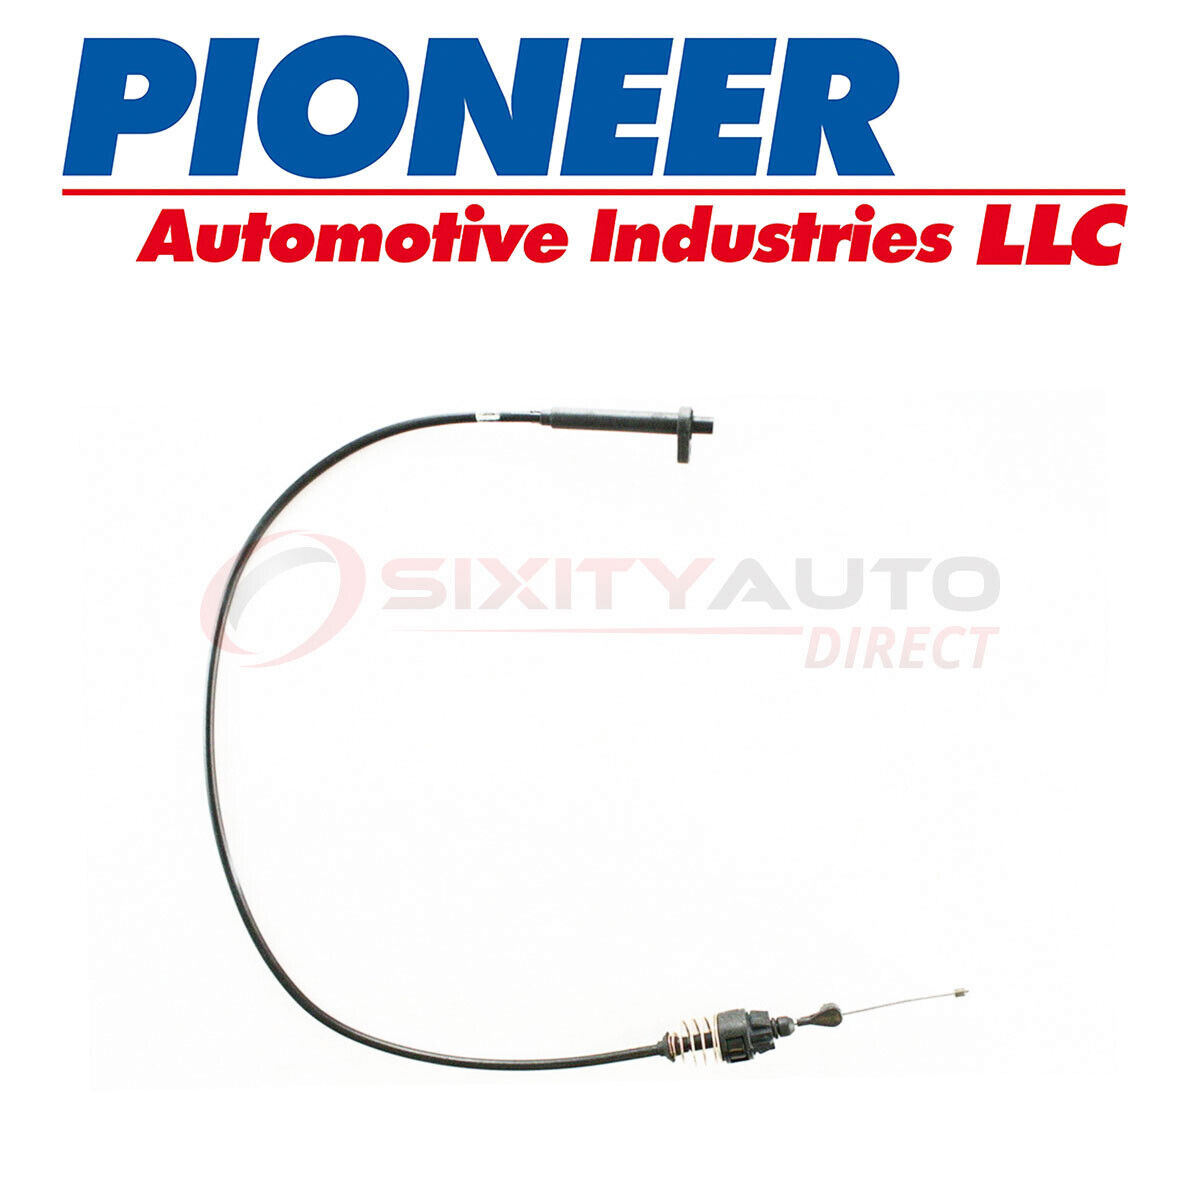 Pioneer Auto Transmission Detent Cable for 1978-1980 Oldsmobile Cutlass fb